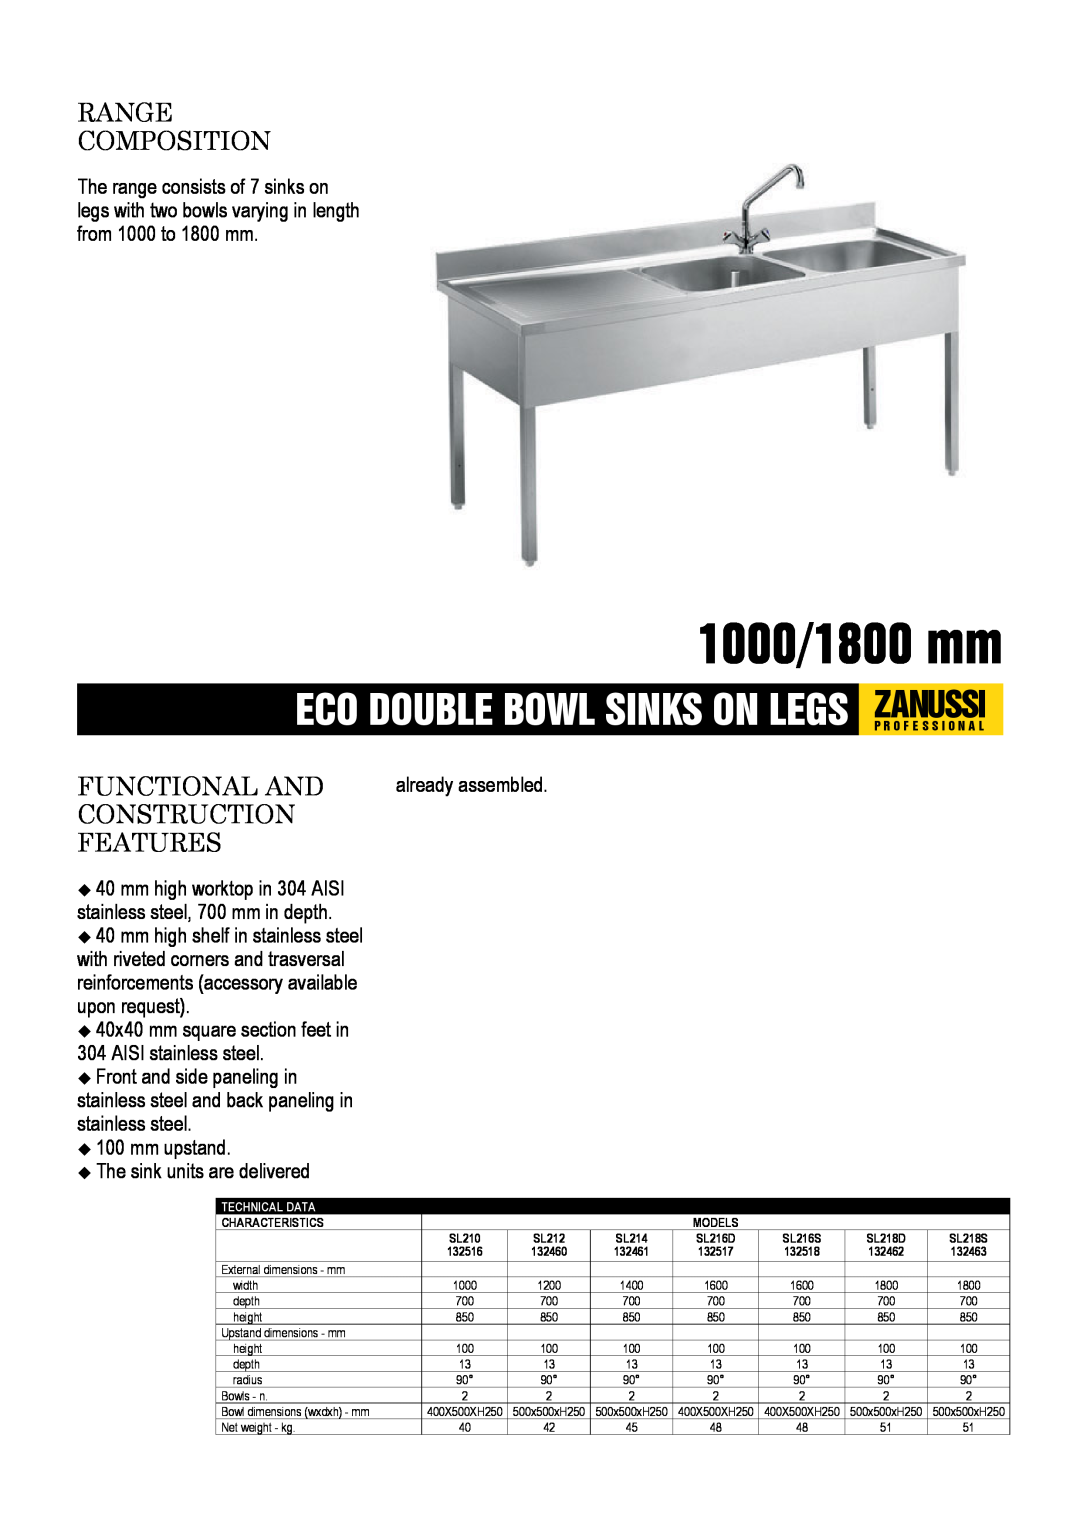 Zanussi SL214, SL216D, SL218S, SL212, SL210 dimensions 1000/1800 mm, Range Composition, Functional And Construction Features 